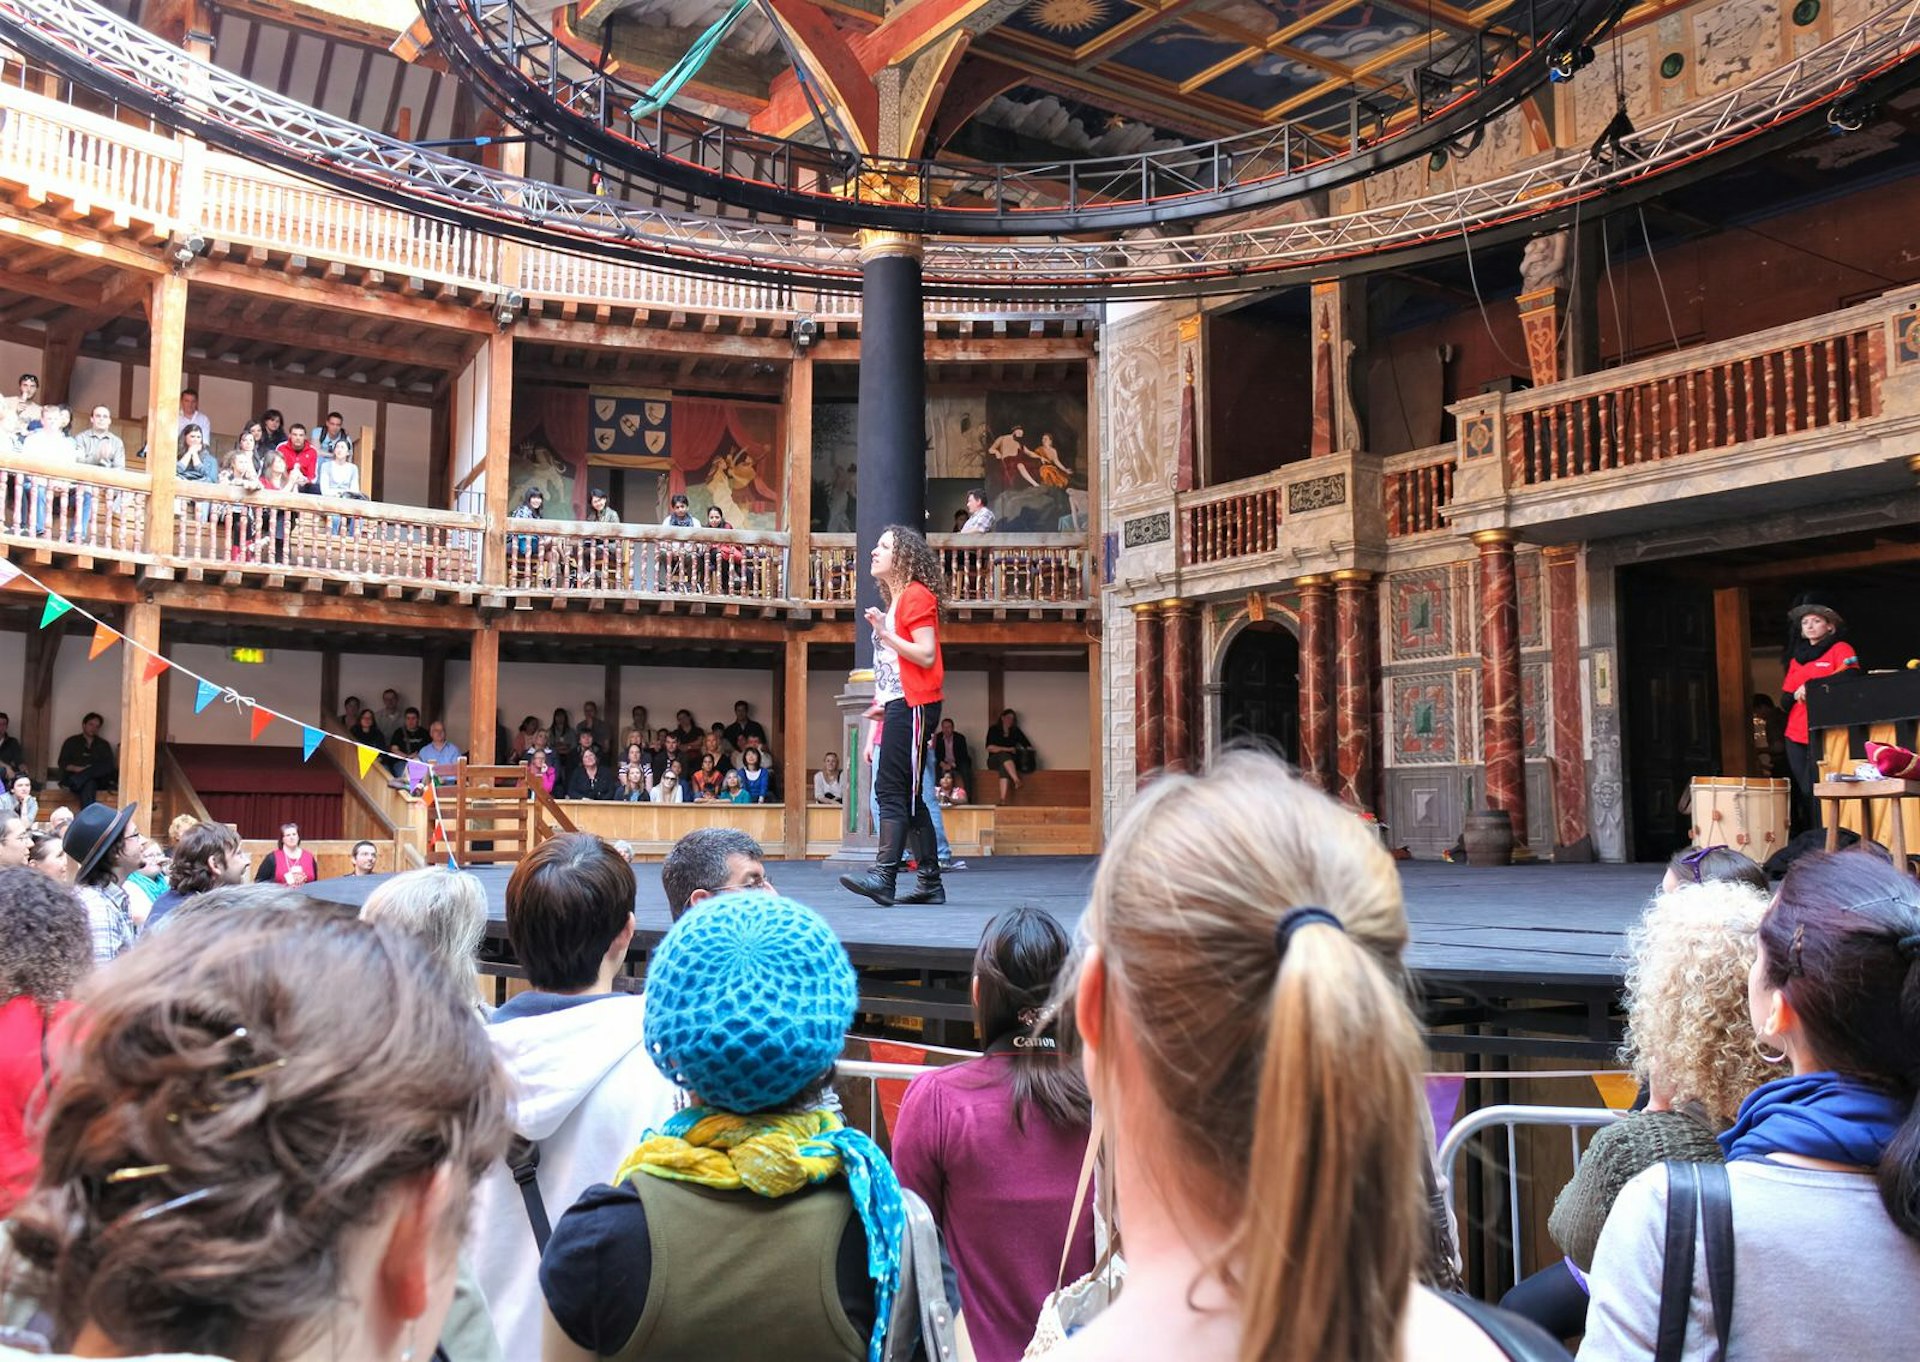 The audience watches a performer on the stage at Shakespeare's Globe, London